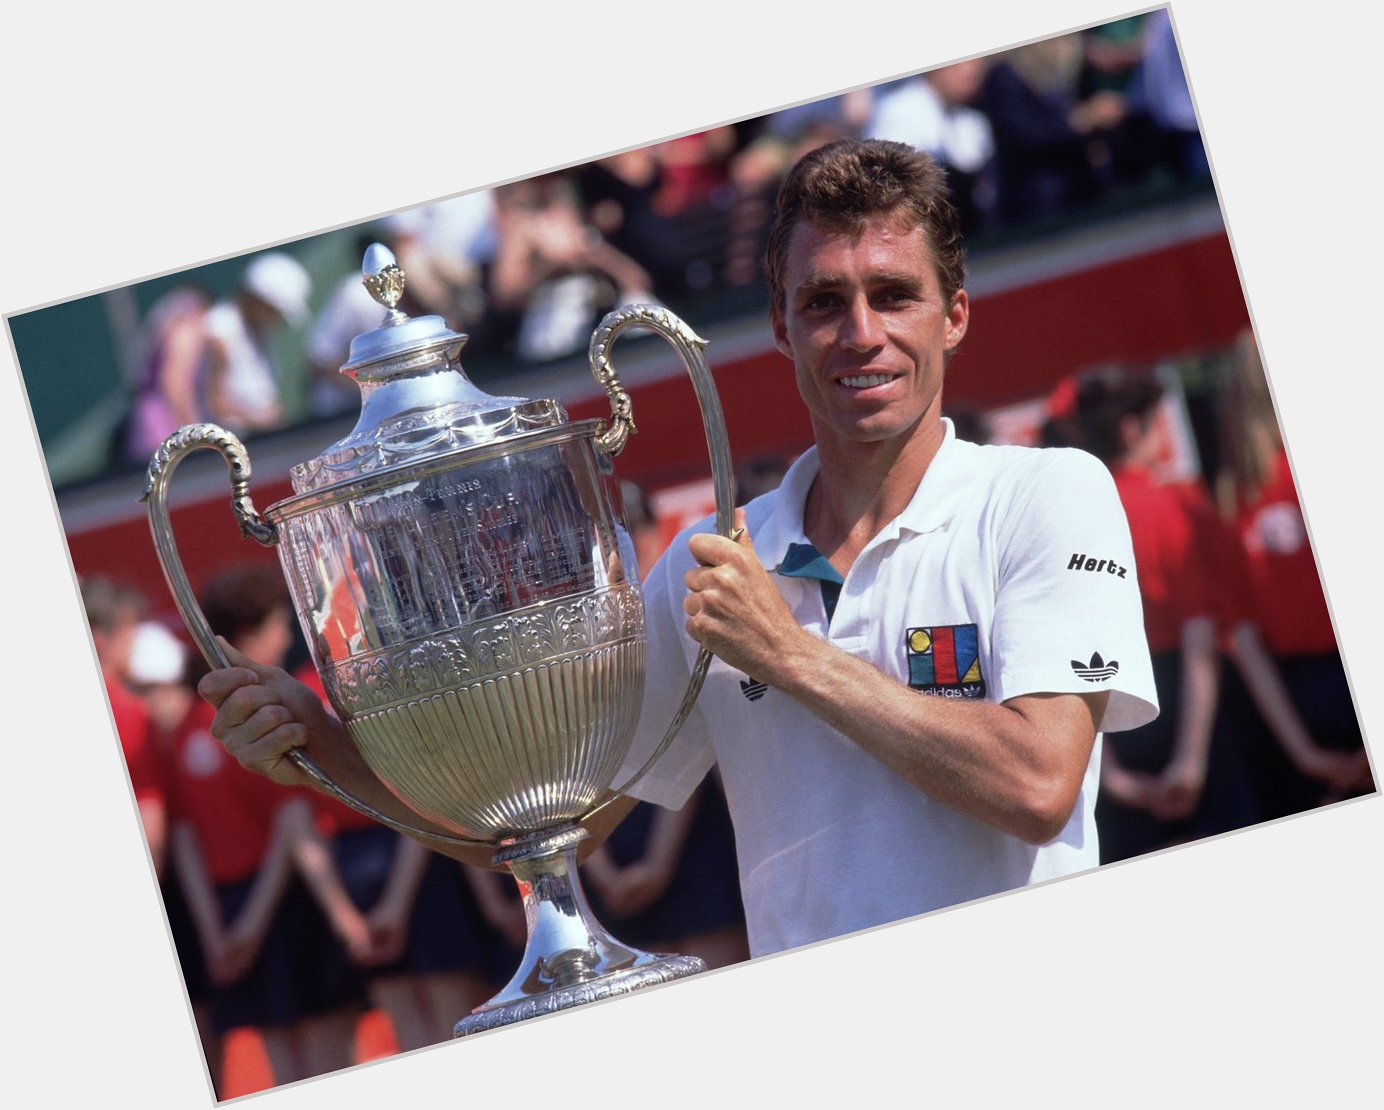 He s smiling! Happy birthday, Ivan Lendl!  champion in 1989 and 1990. 